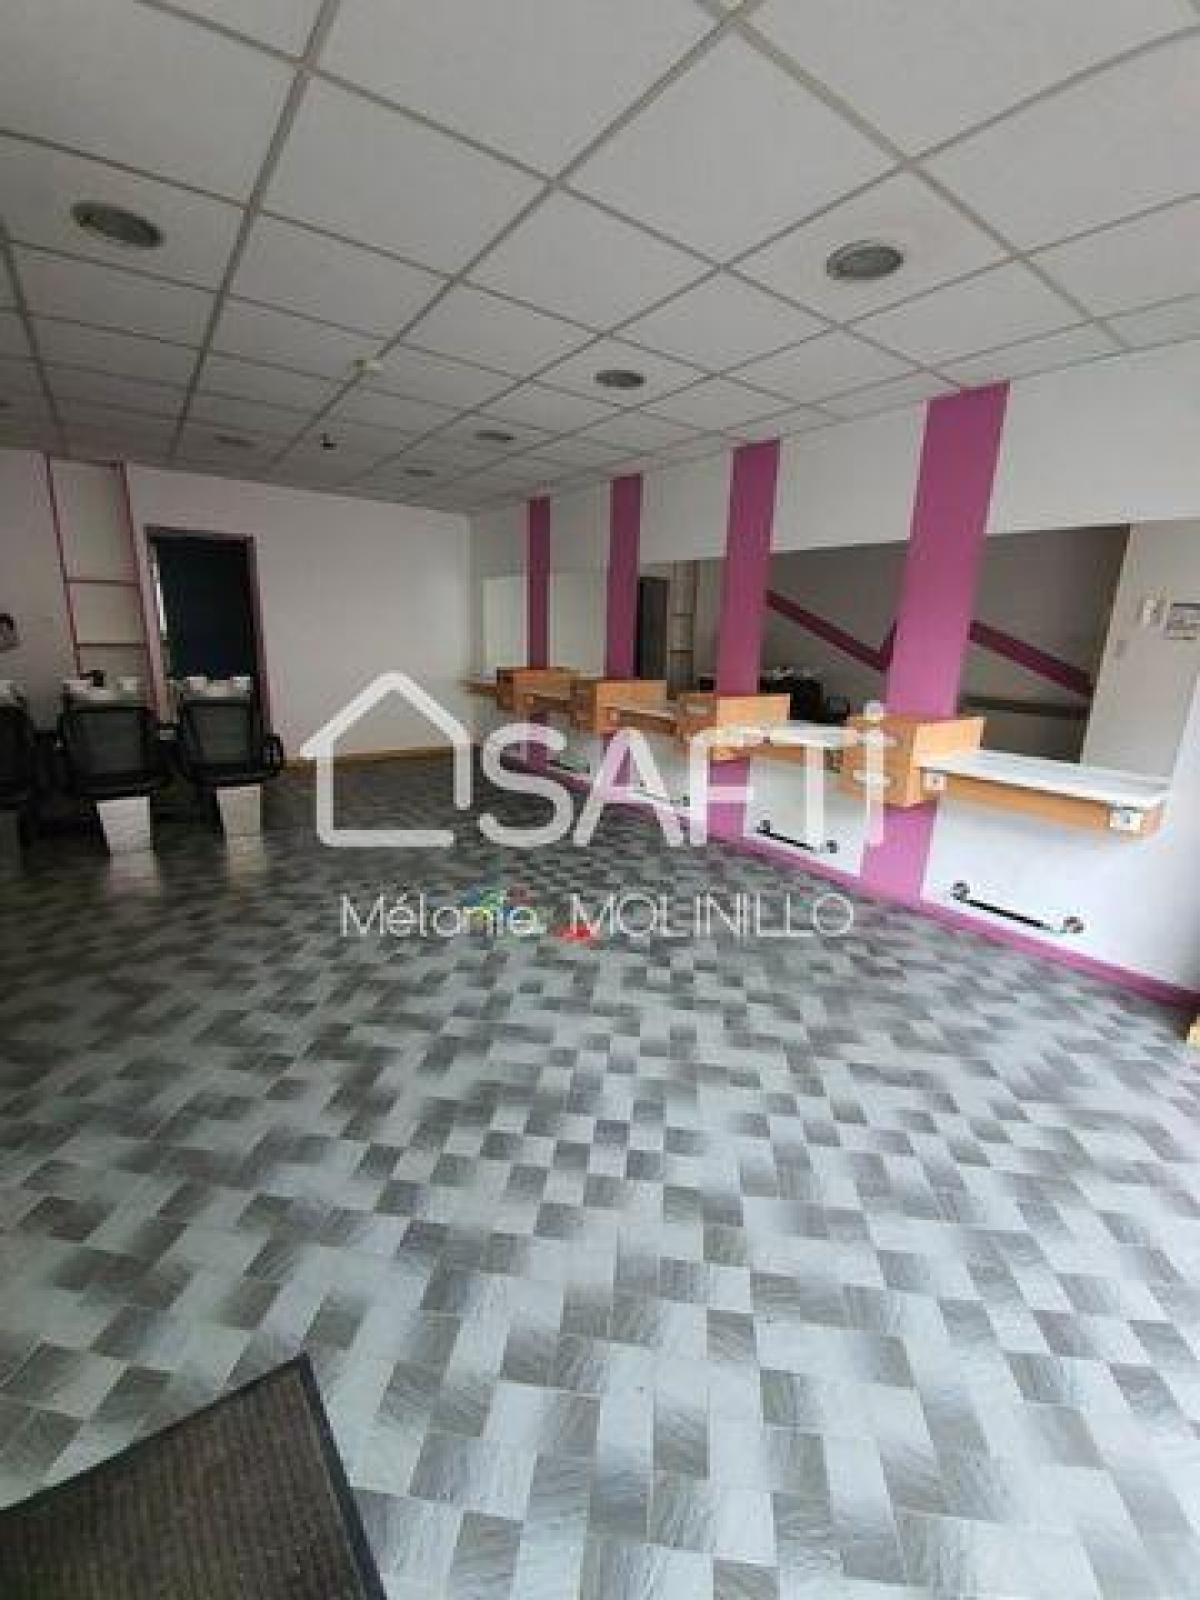 Picture of Office For Sale in Stenay, Lorraine, France